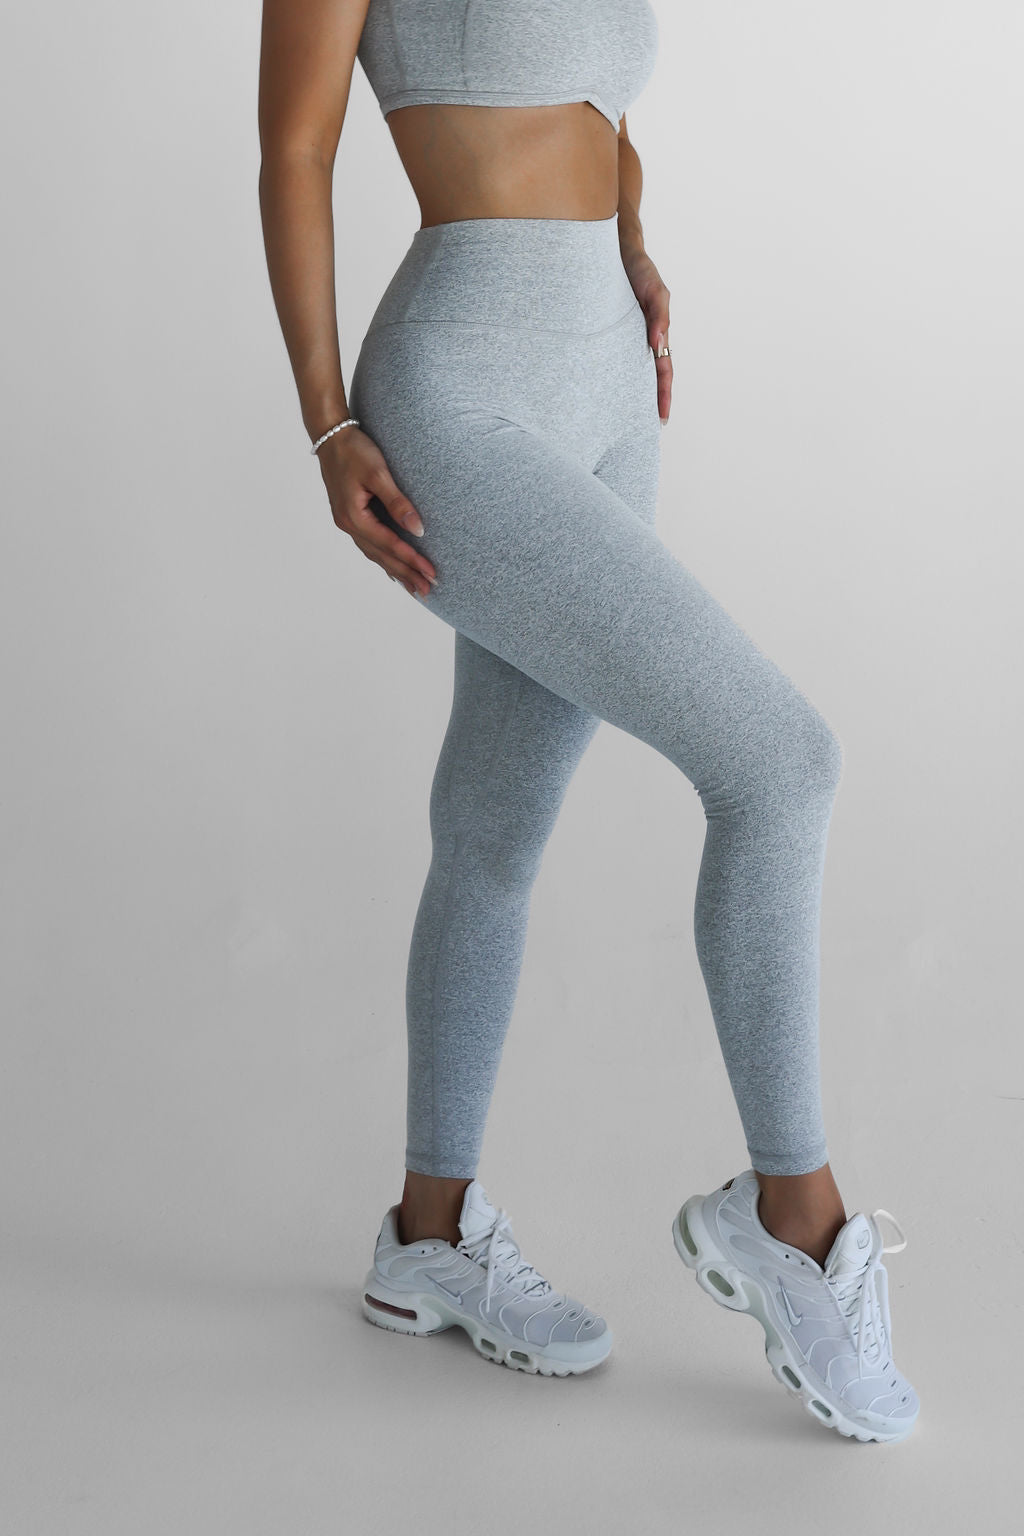 Signature Rated Squat Marl 5 Star Grey, - Full Waisted, High Length Leggings Proof,